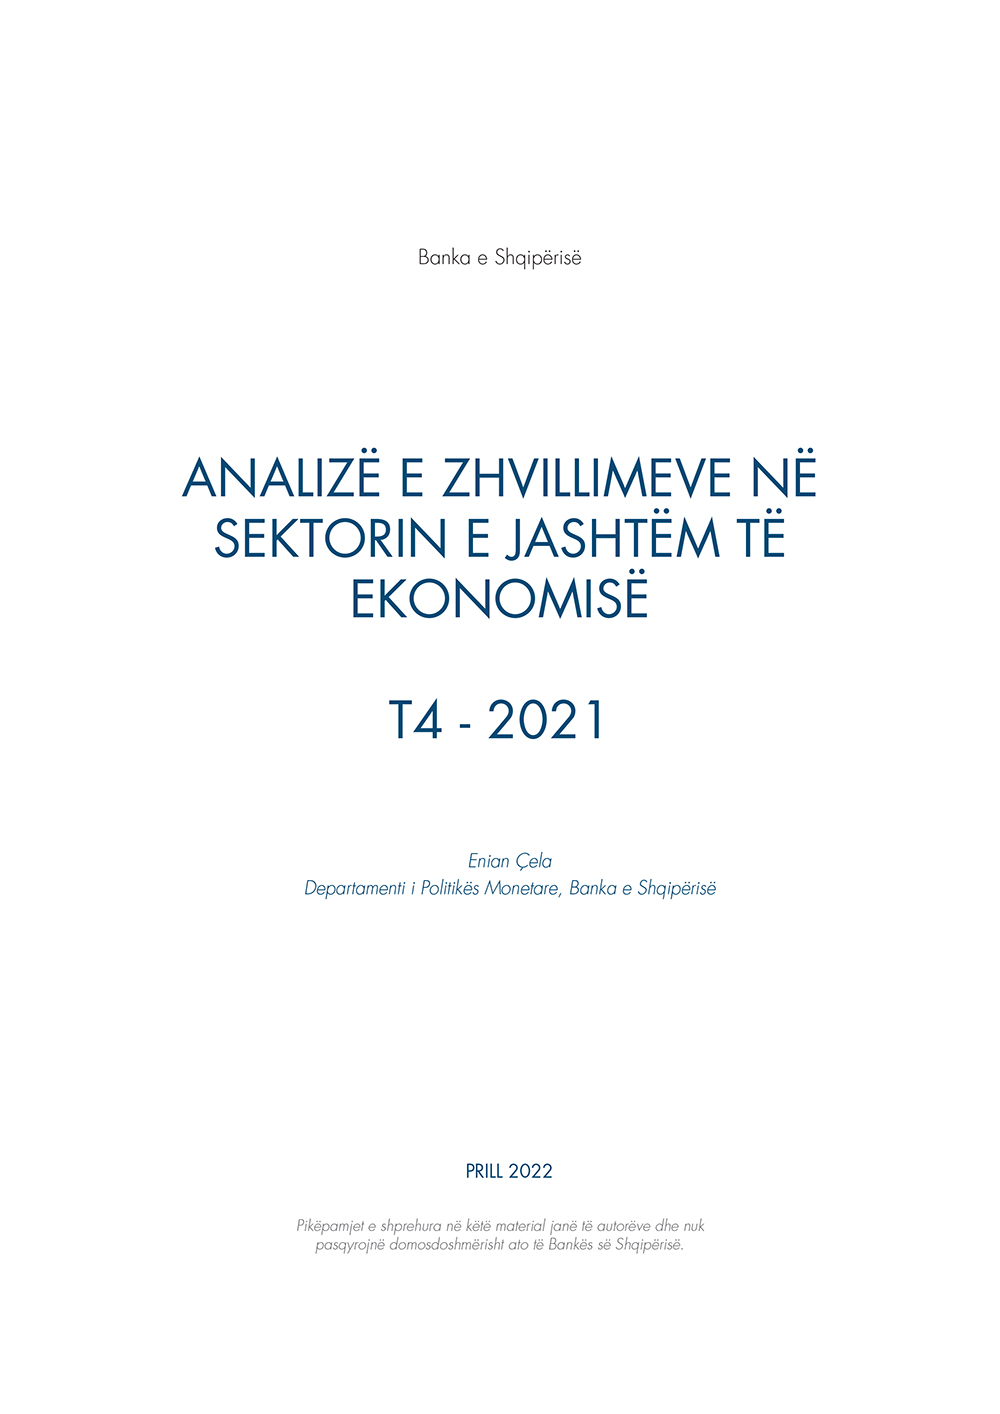 Analysis of developments in the external sector of the economy 2021 Q4